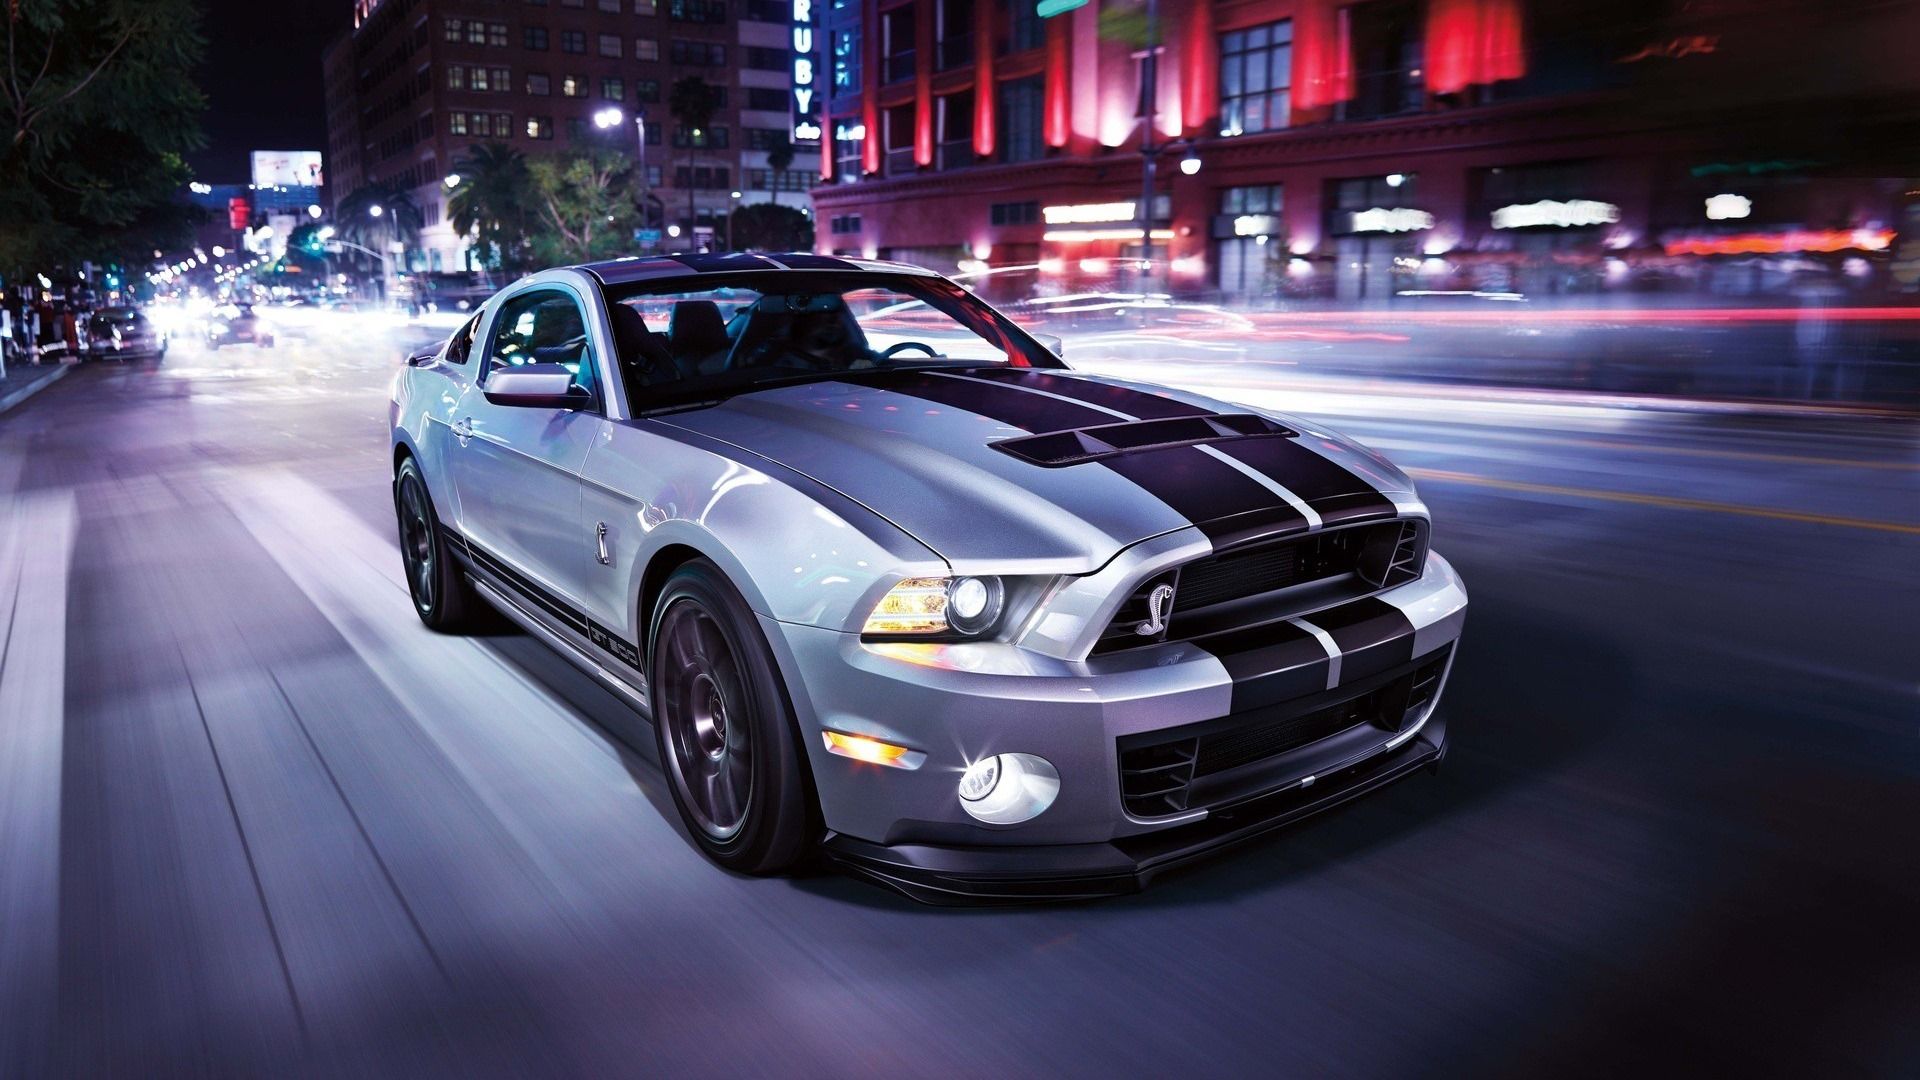 Best Car Wallpapers For Desktop On Hd Full Pics Of - Ford Mustang Background - HD Wallpaper 